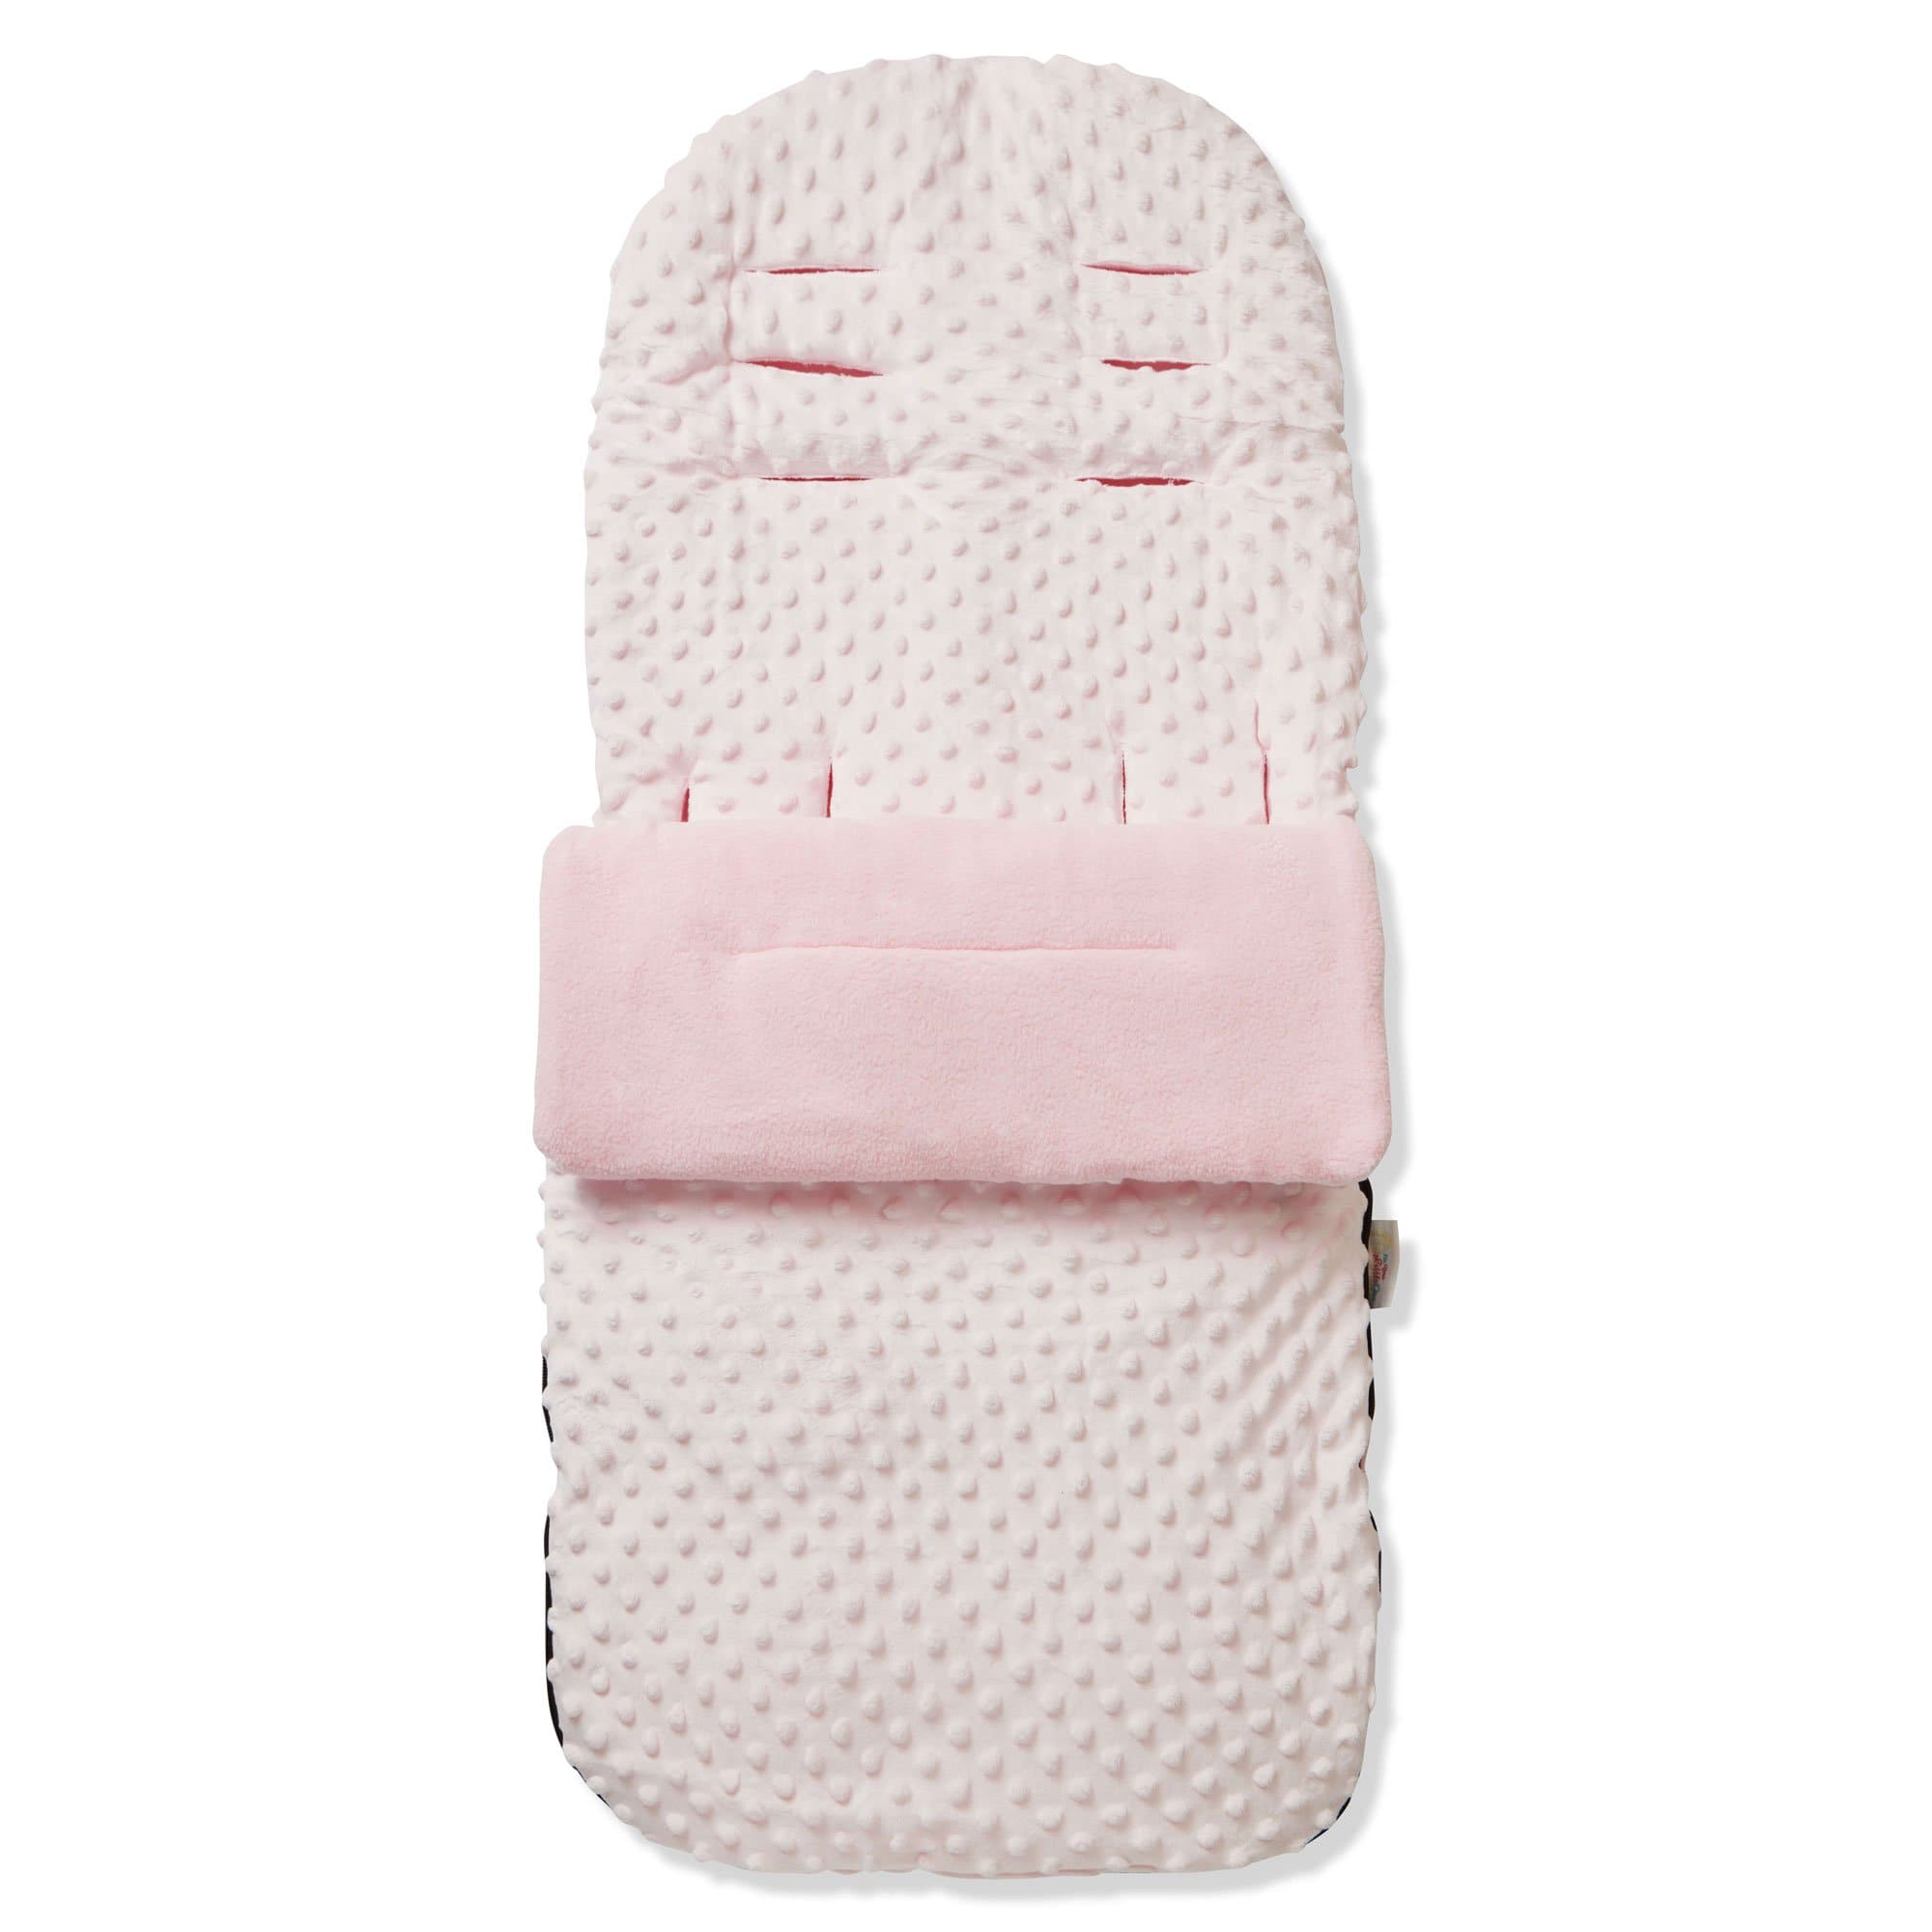 Dimple Footmuff / Cosy Toes Compatible with Nuna - Pink / Fits All Models | For Your Little One